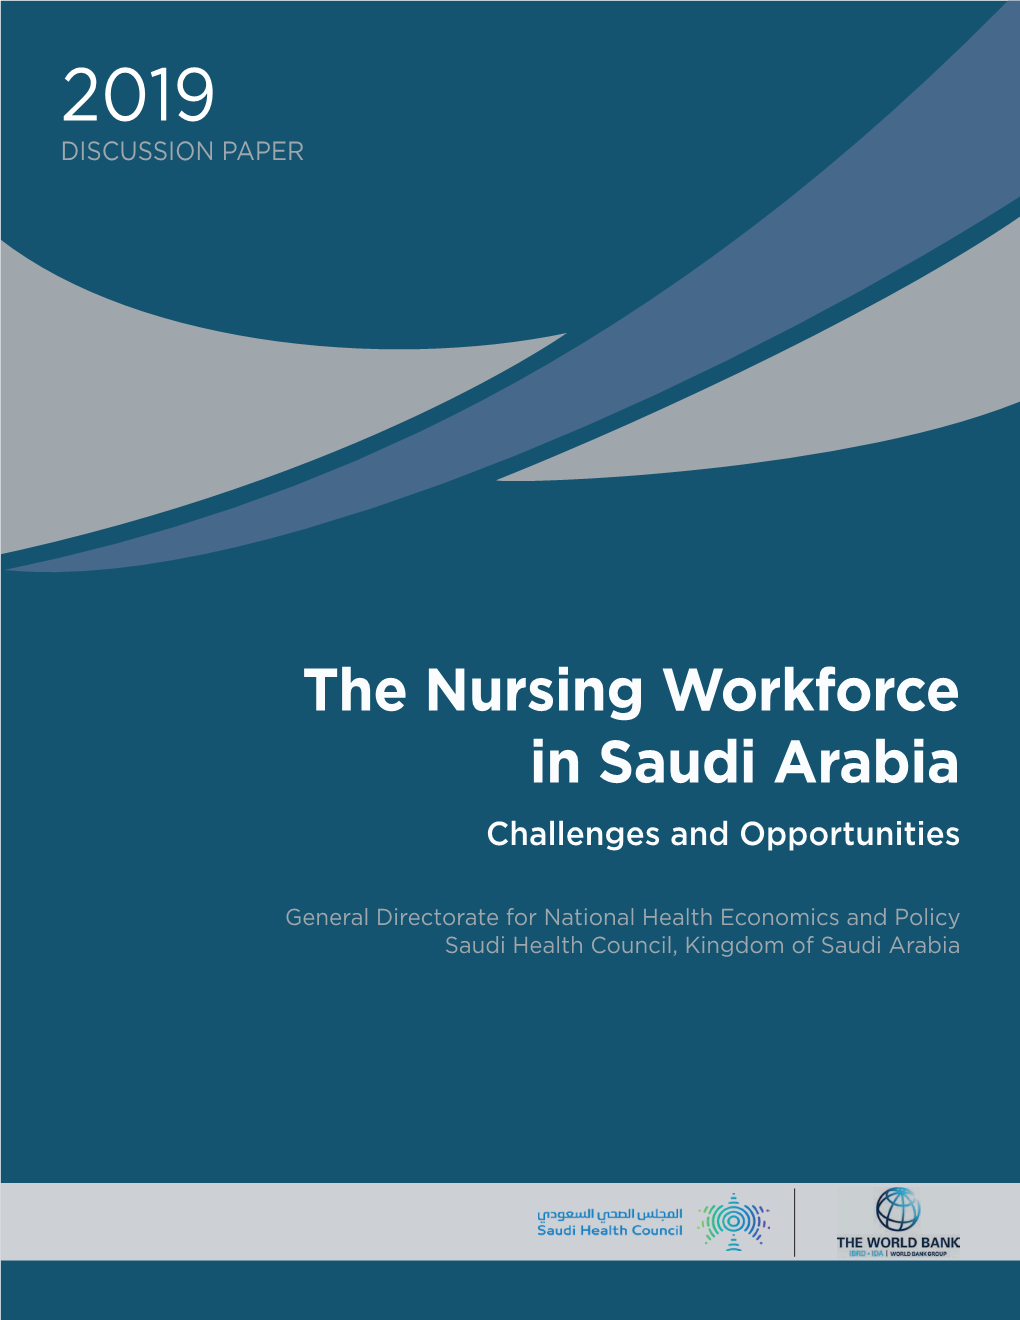 The Nursing Workforce in Saudi Arabia Challenges and Opportunities